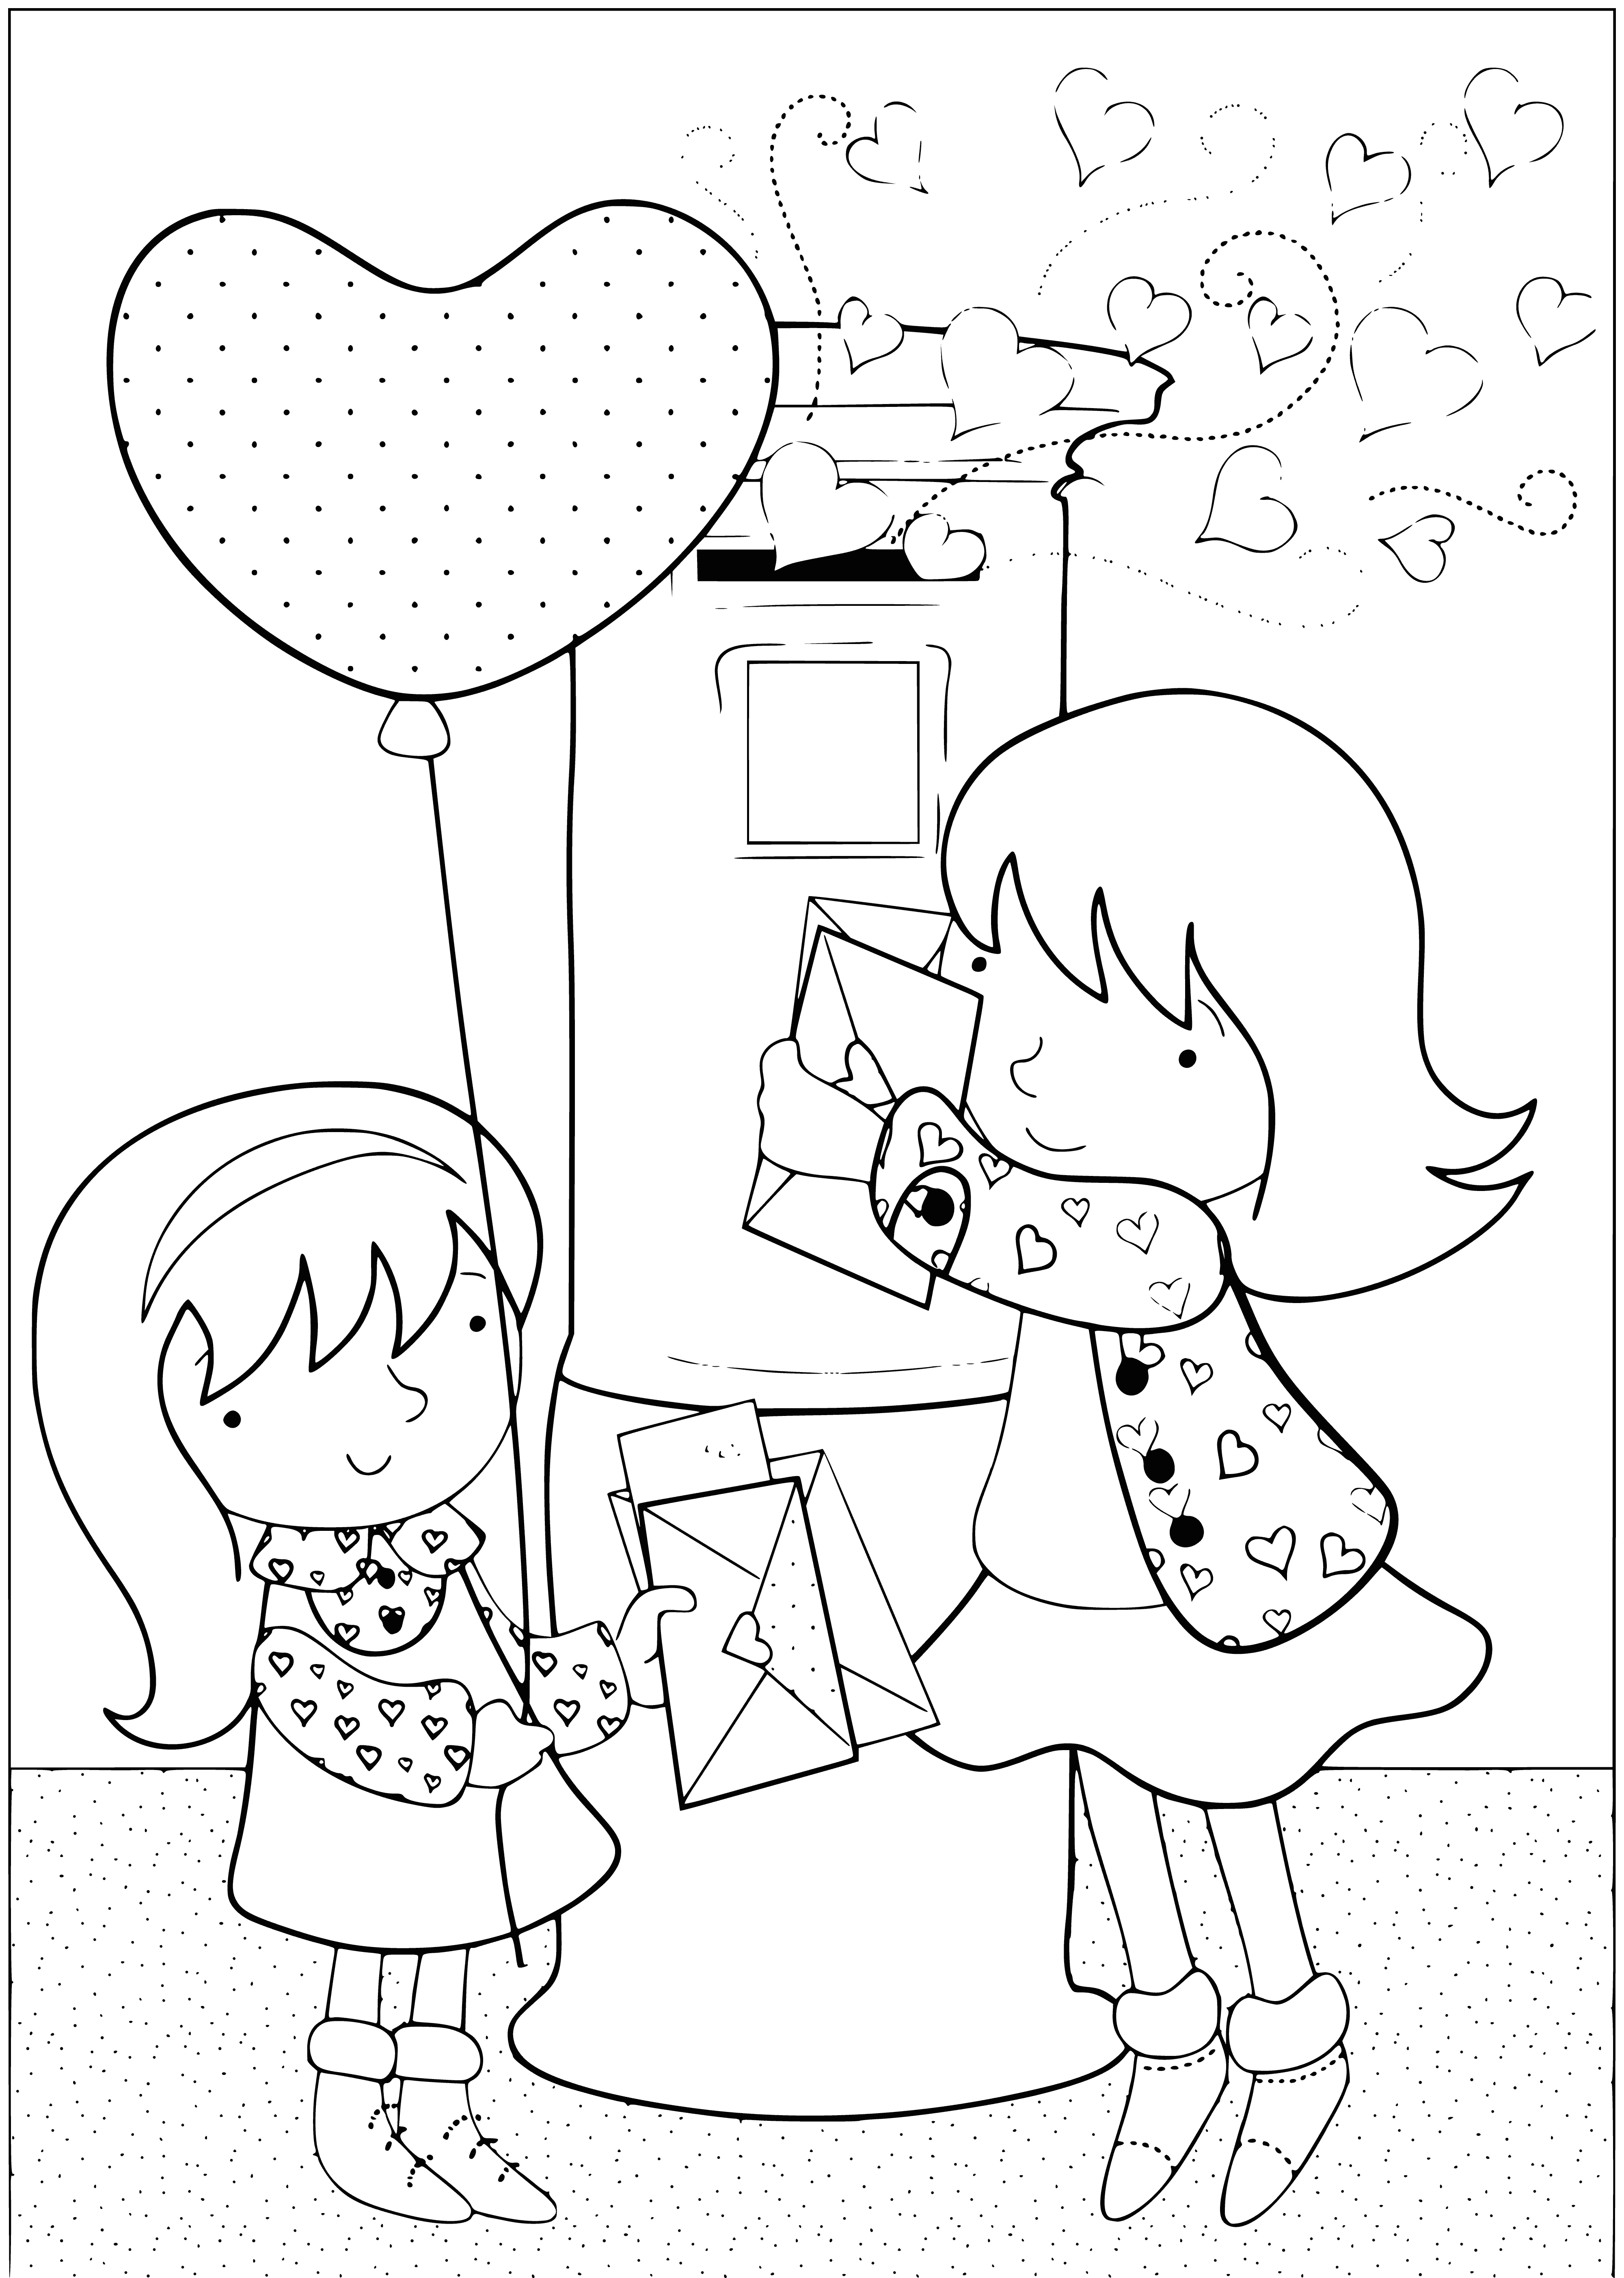 coloring page: 3 girls: 1 w/ dark brown hair in pink dress w/ heart locket, 2 w/ blonde hair in white dresses. One holds a pink flower, other has valentines. Smiling.